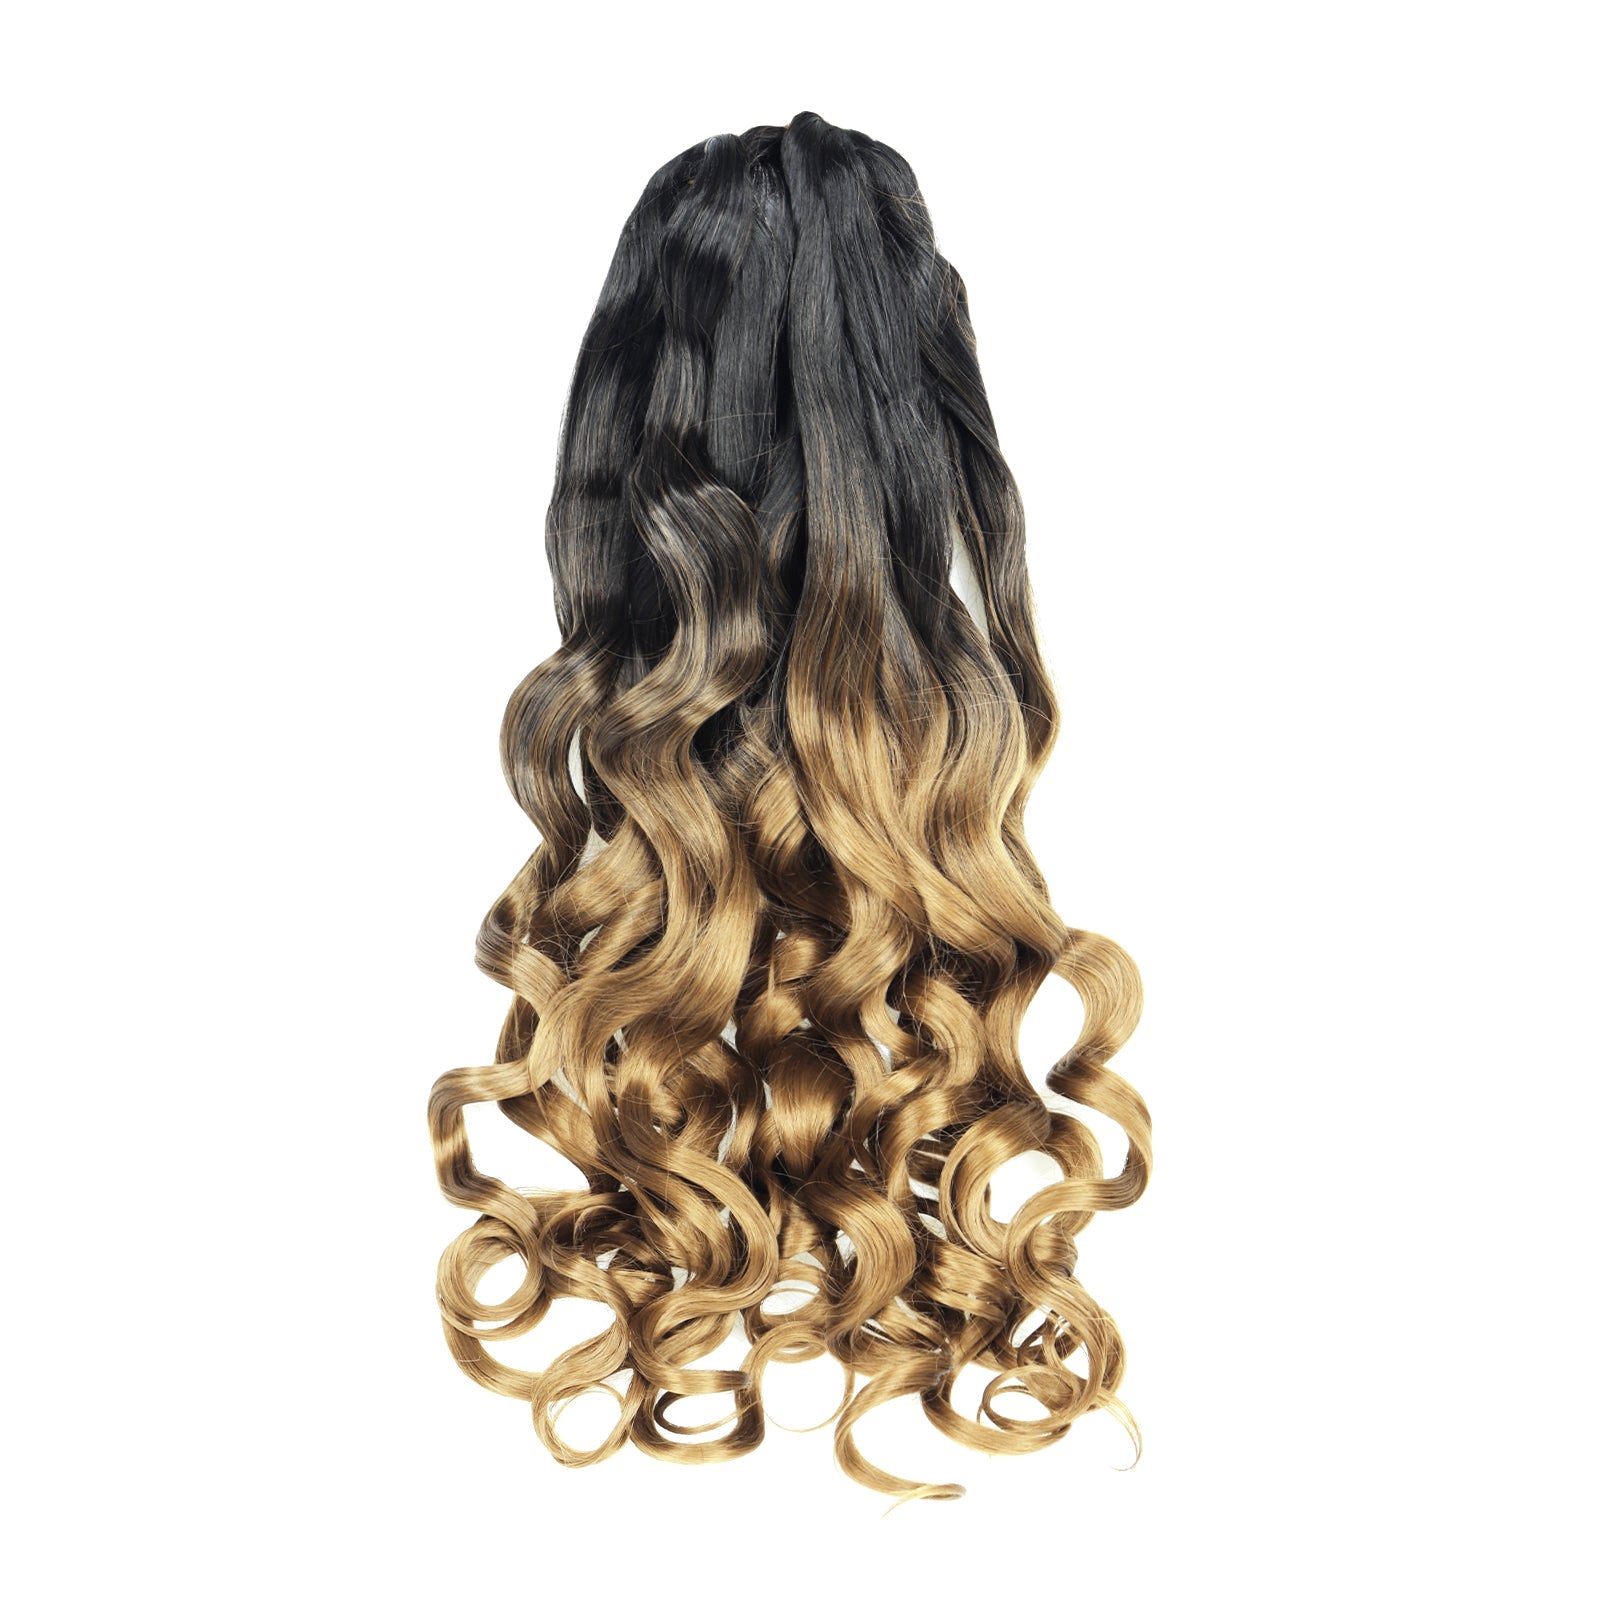 𝗚𝗲𝗺𝗶𝗻𝗶 | Curly End Pre-stretched Braiding Hair 20-24 Inch | Loose Wave Curly End Crochet Box Braids Synthetic Braiding Hair